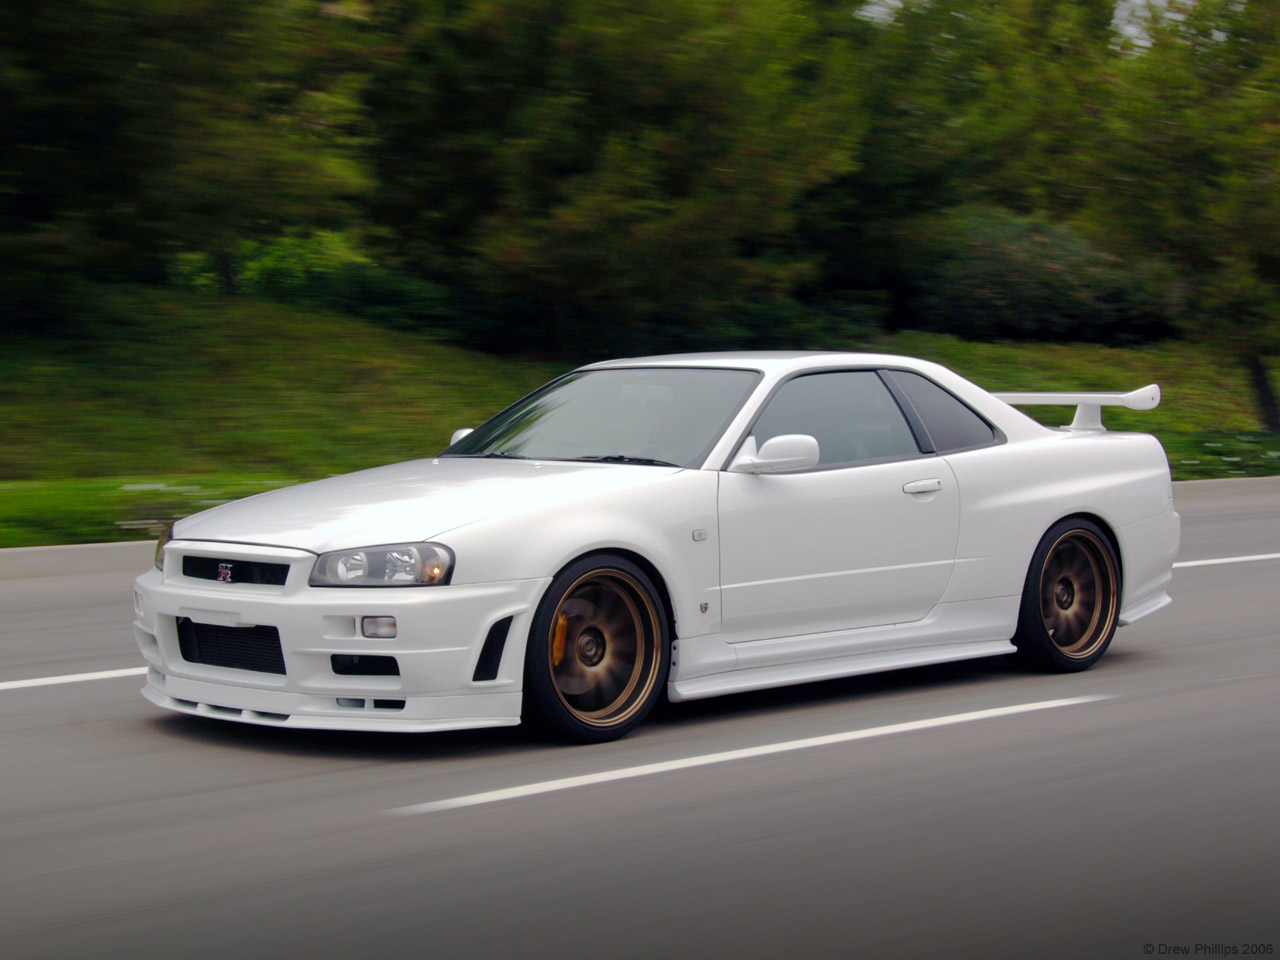 Nissan Skyline R34-GT. View Download Wallpaper. 1280x960. Comments